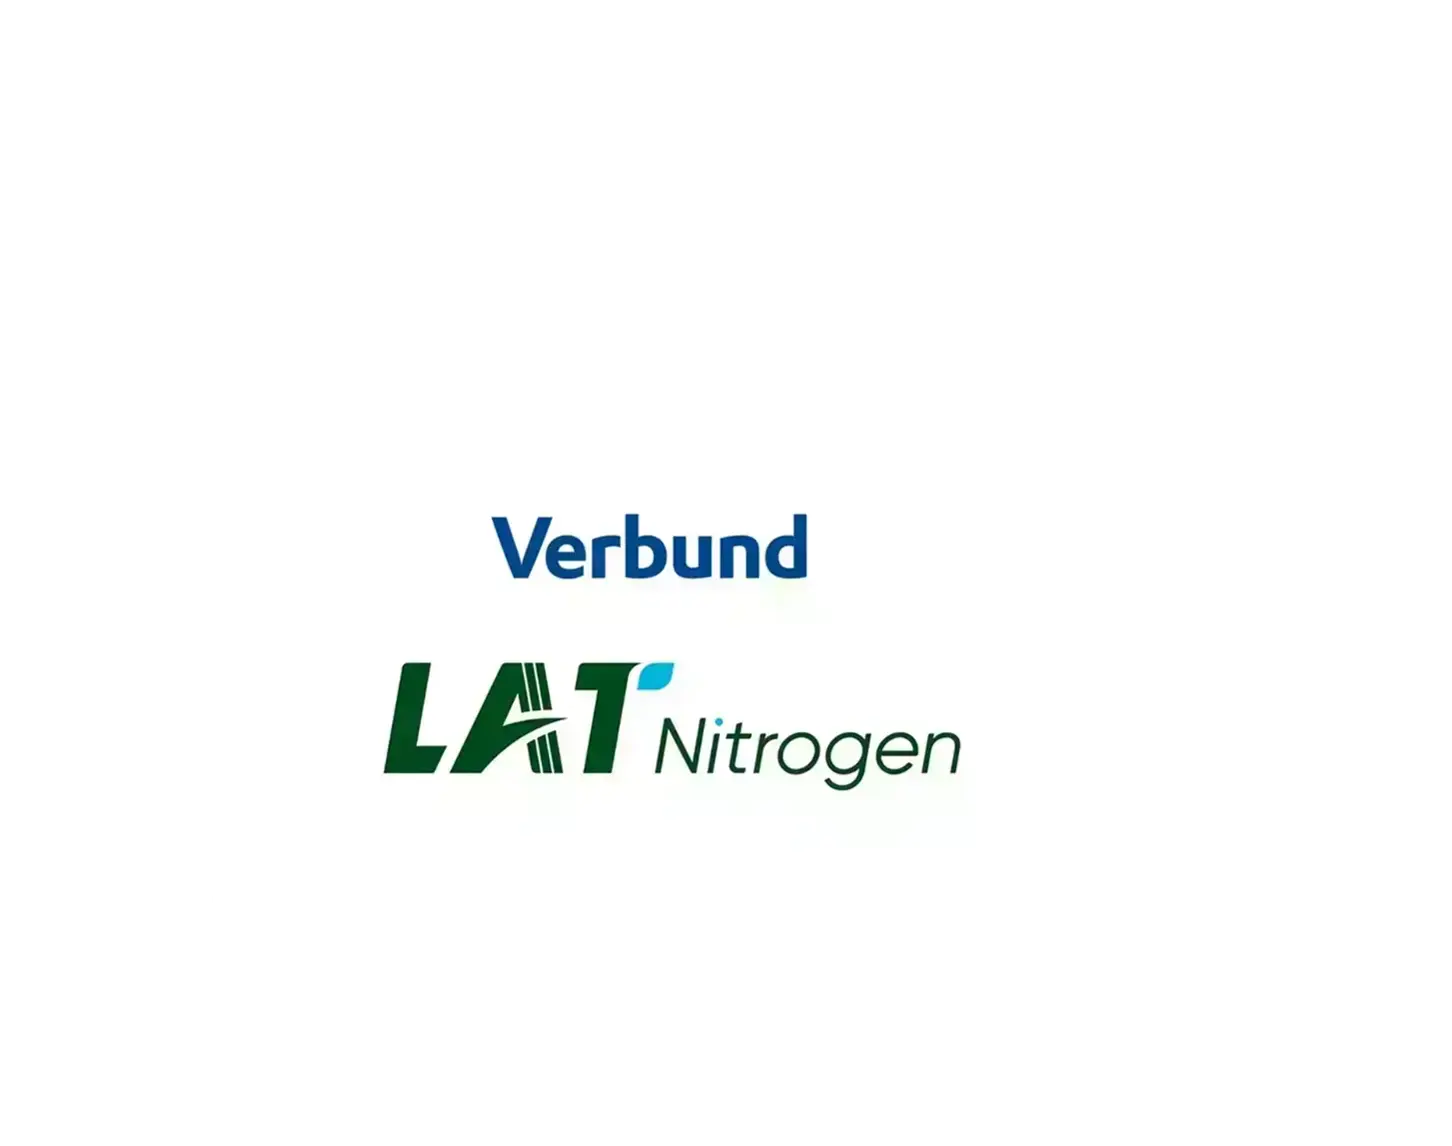 The Logos of both project partners VERBUND and LAT Nitrogen are shown